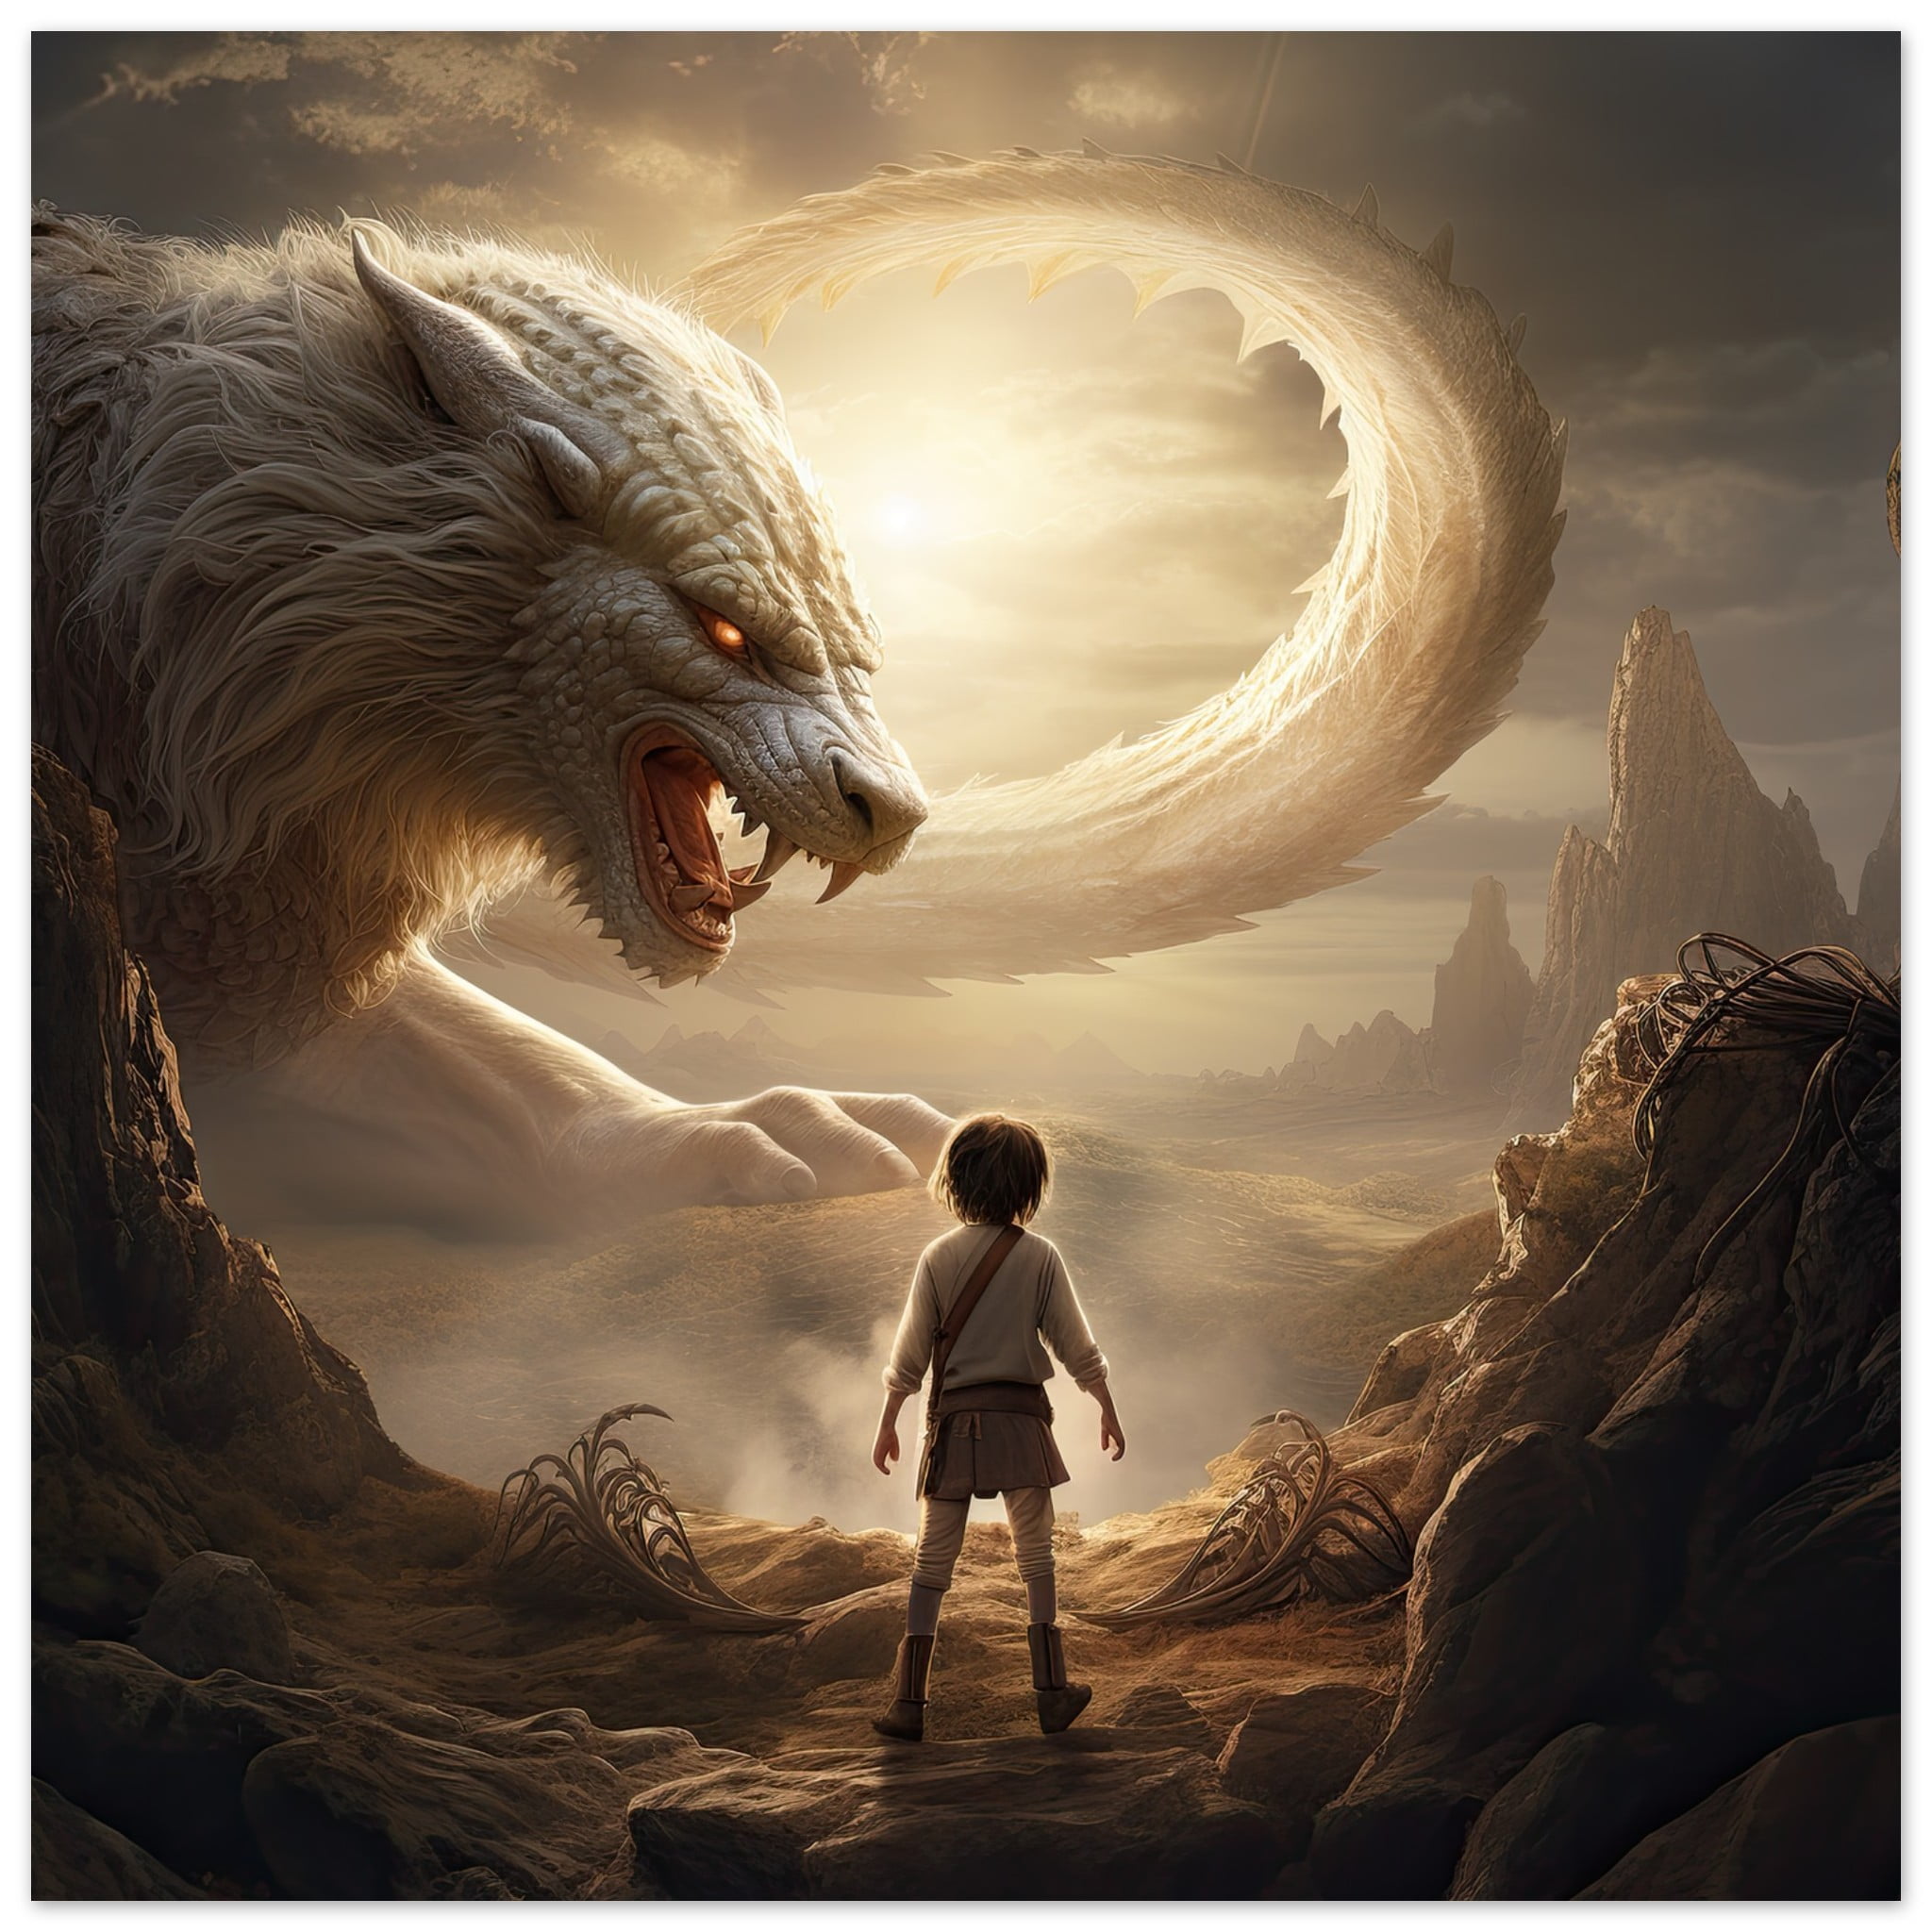 The Boy and the Chimera Art Poster – 40×40 cm / 16×16″